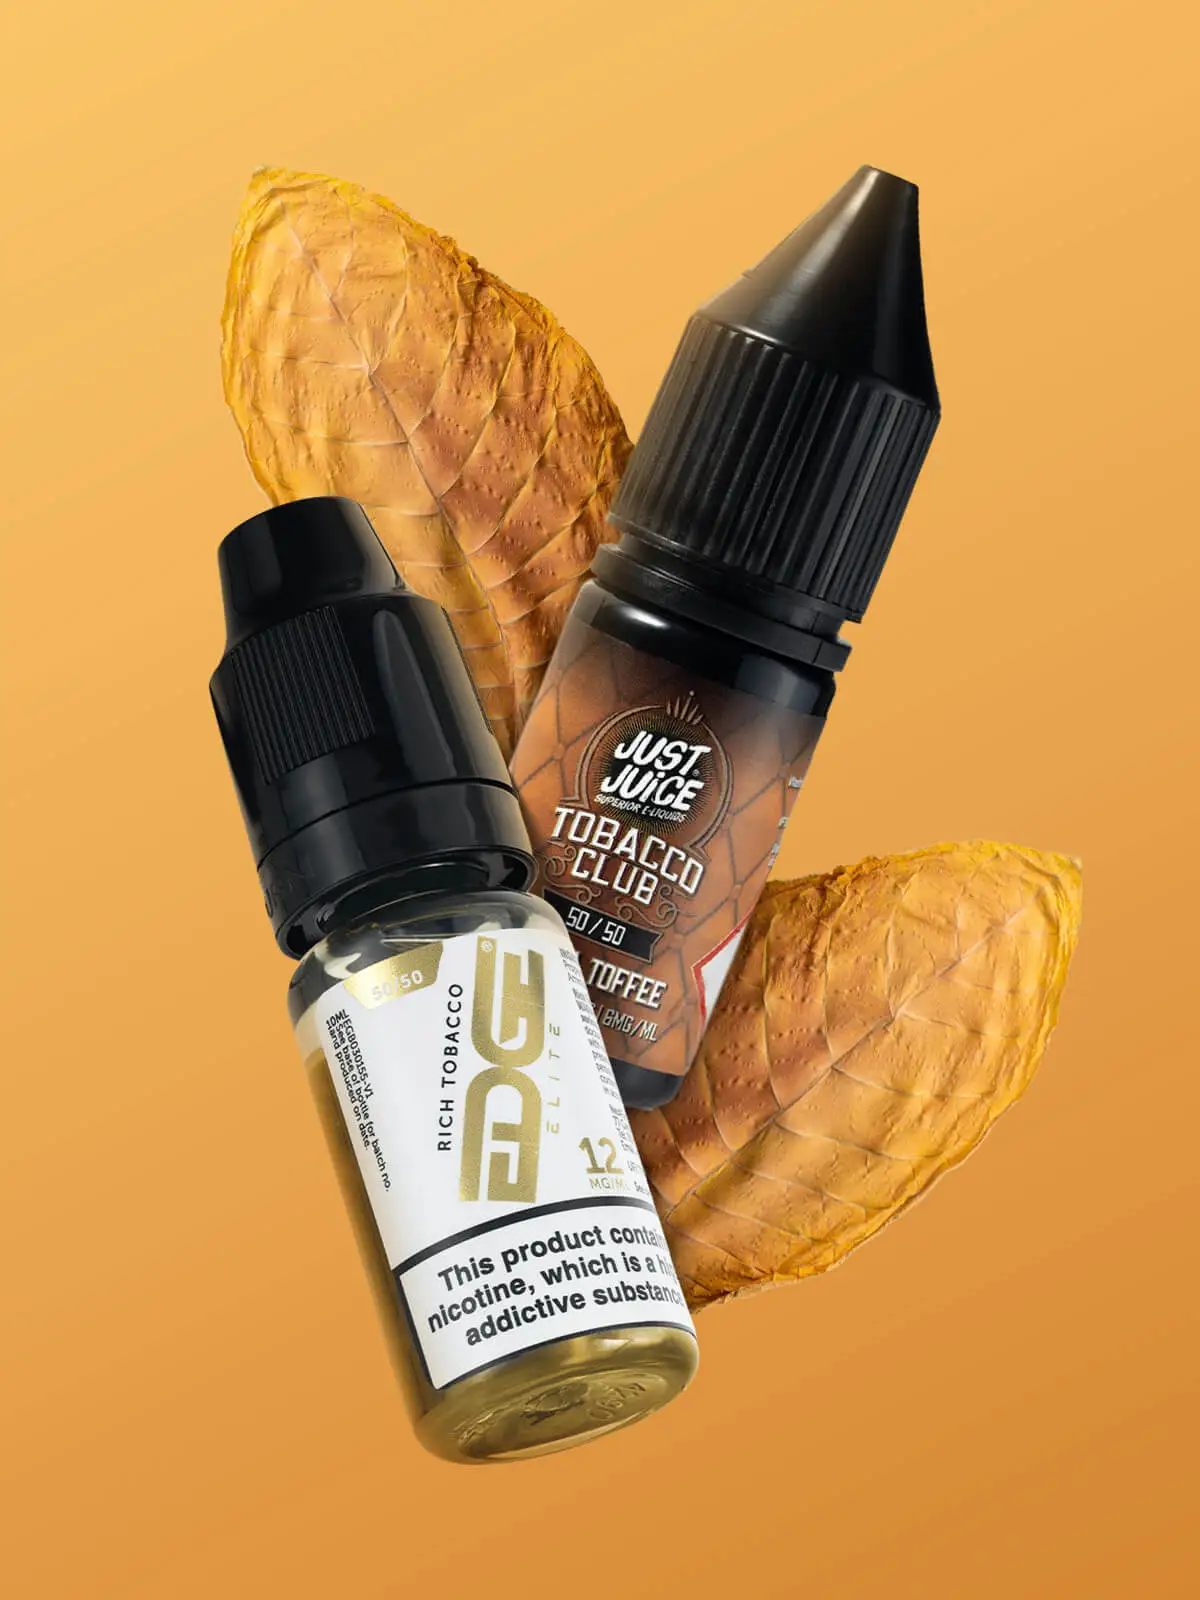 Two bottles of tobacco e-liquid; Edge Rich Tobacco and Just Juice Vanilla Toffee Tobacco, with tobacco leaves in front of a light brown background